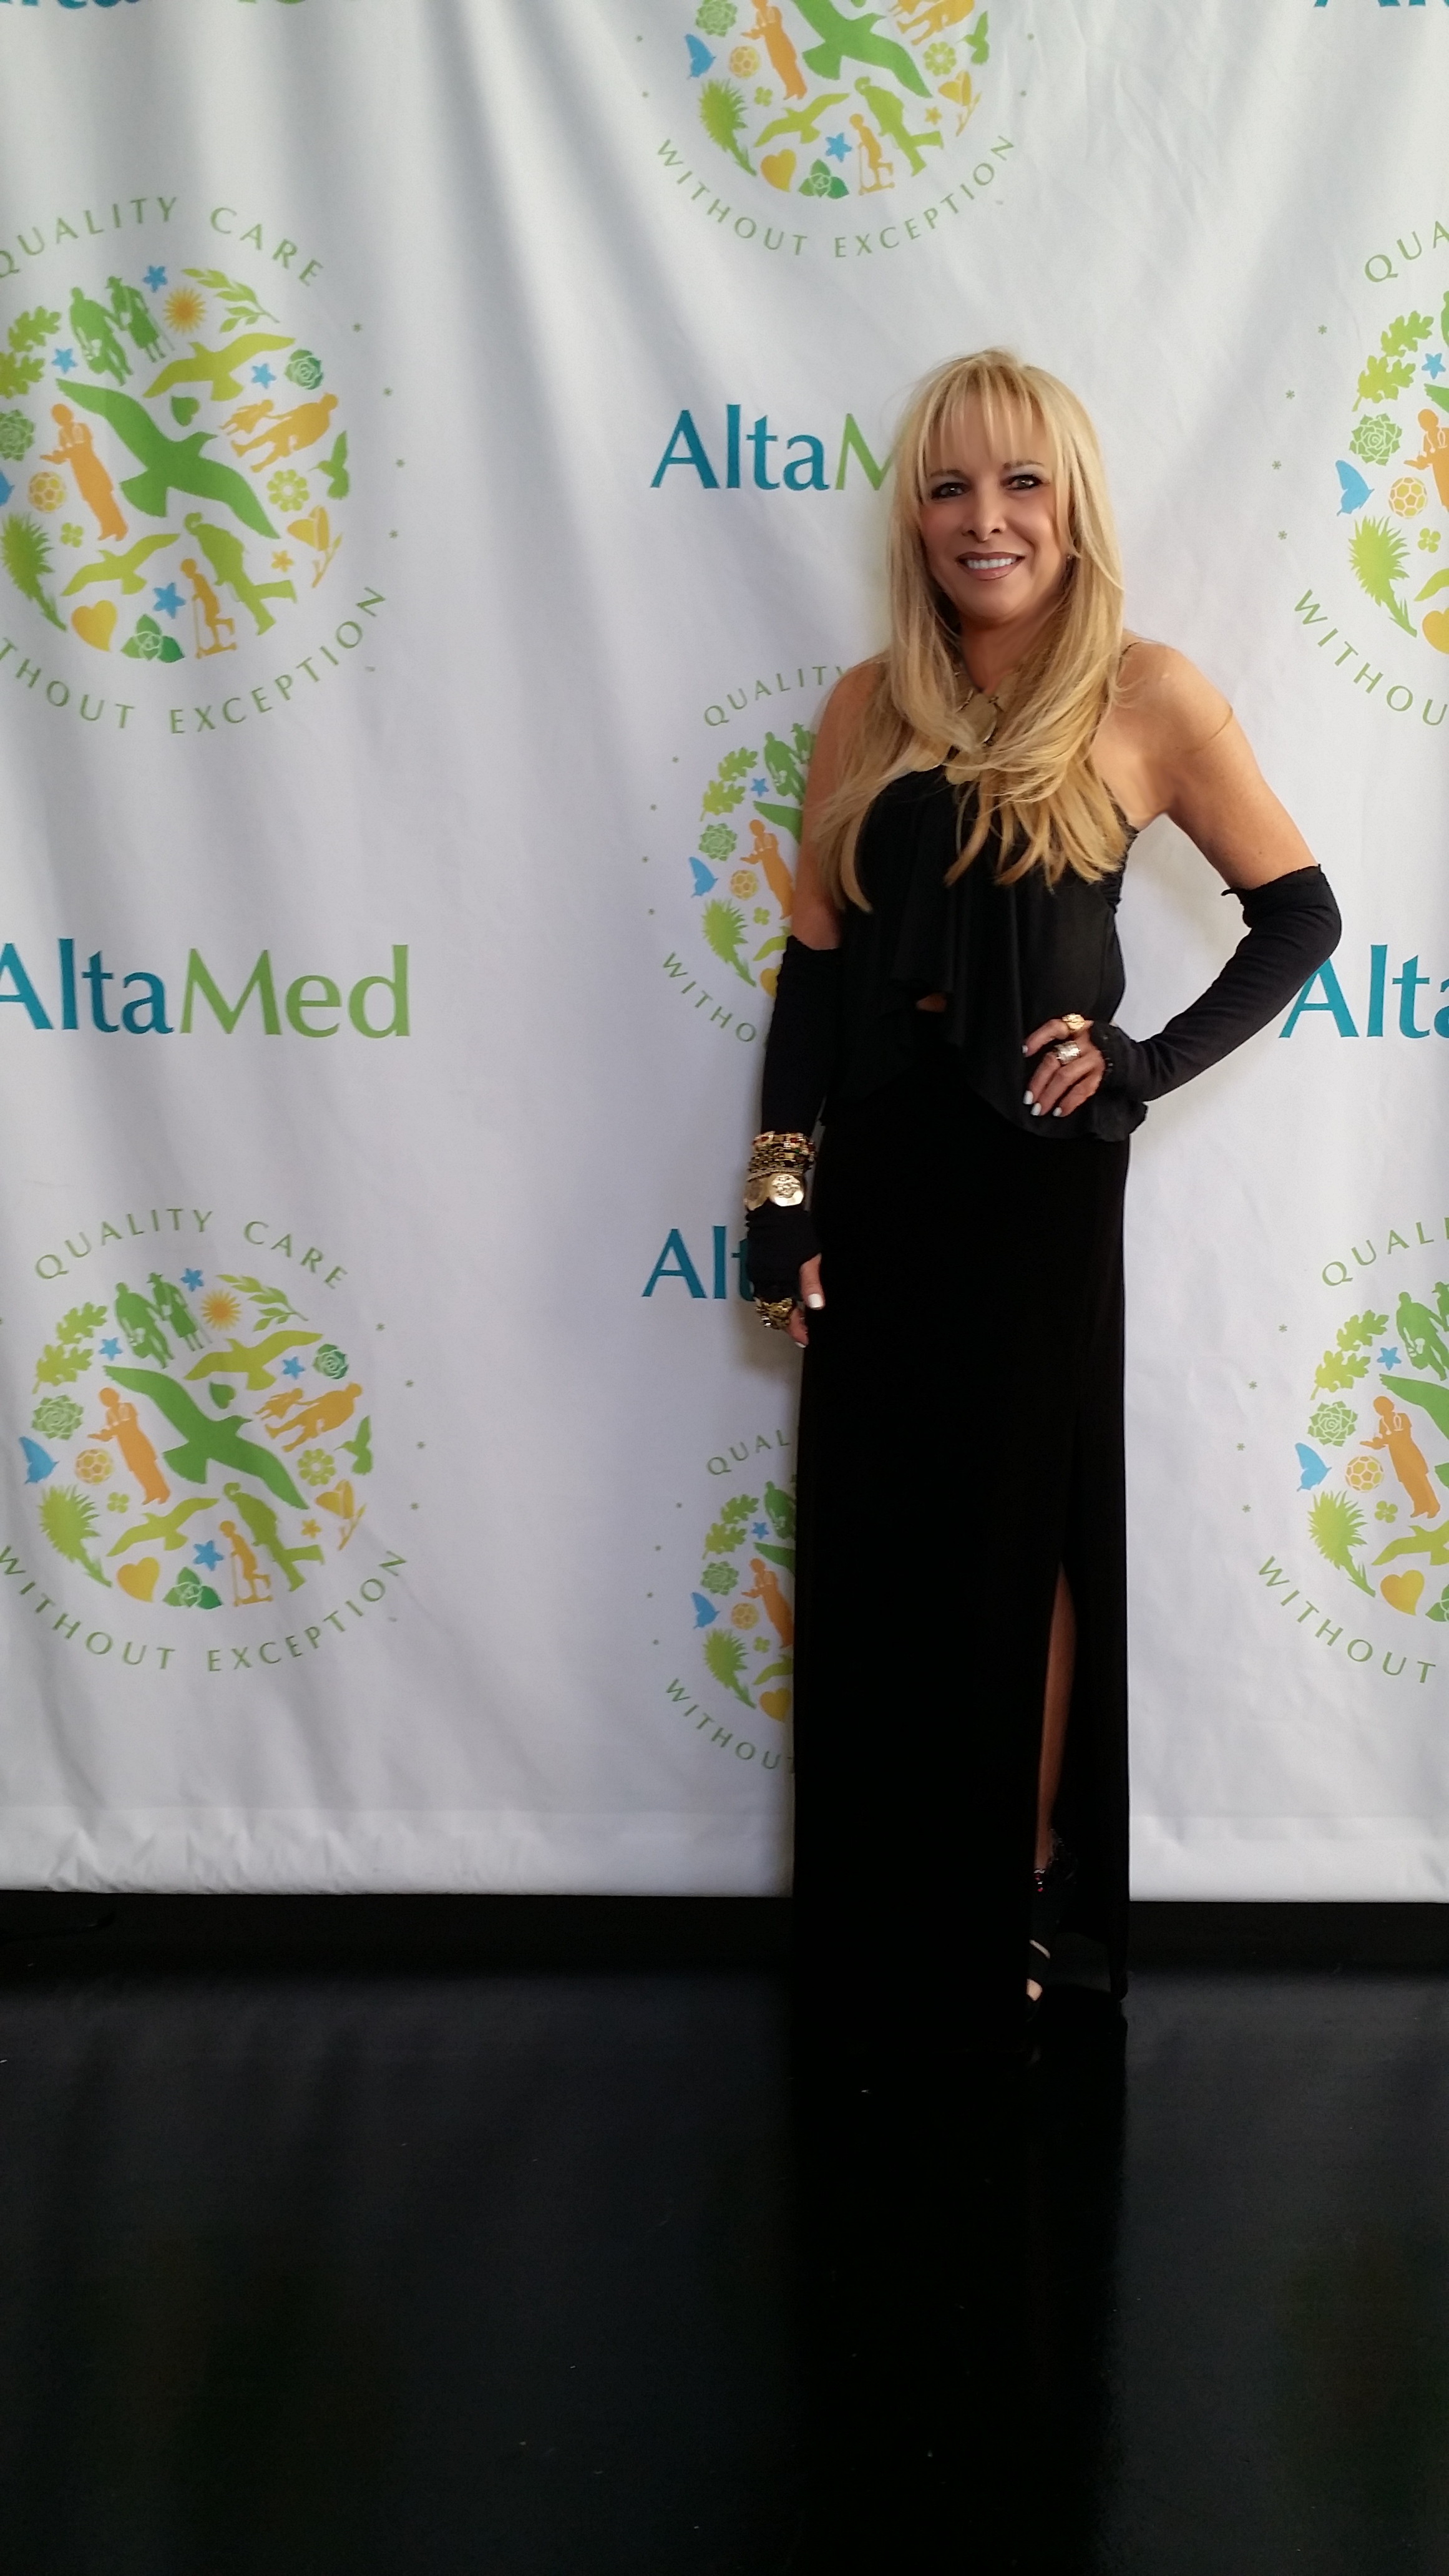 ALTA MED CHARITY NIGHT, BEVERLY HILLS HOTEL